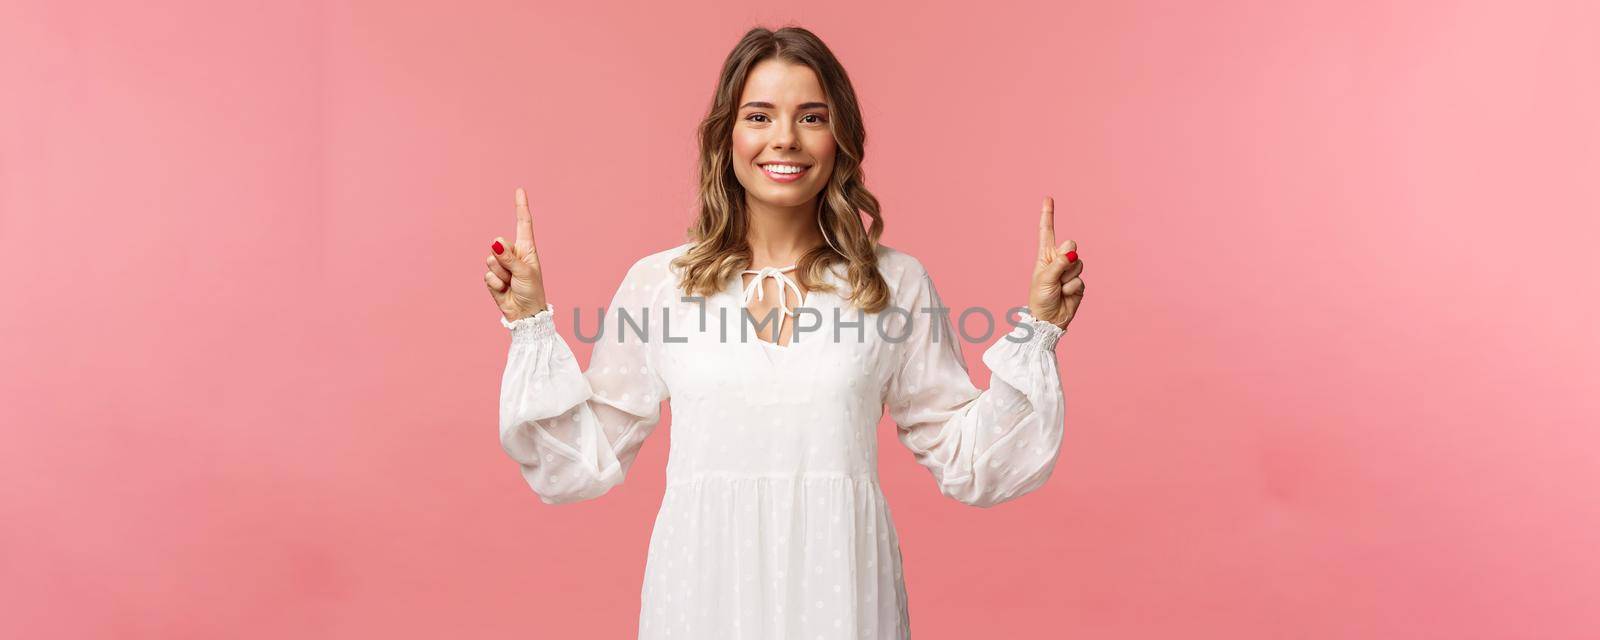 Portrait of confident beautiful young blond woman in white cute dress, pointing fingers up at top advertisement, looking at camera with beaming smile, standing pink background.